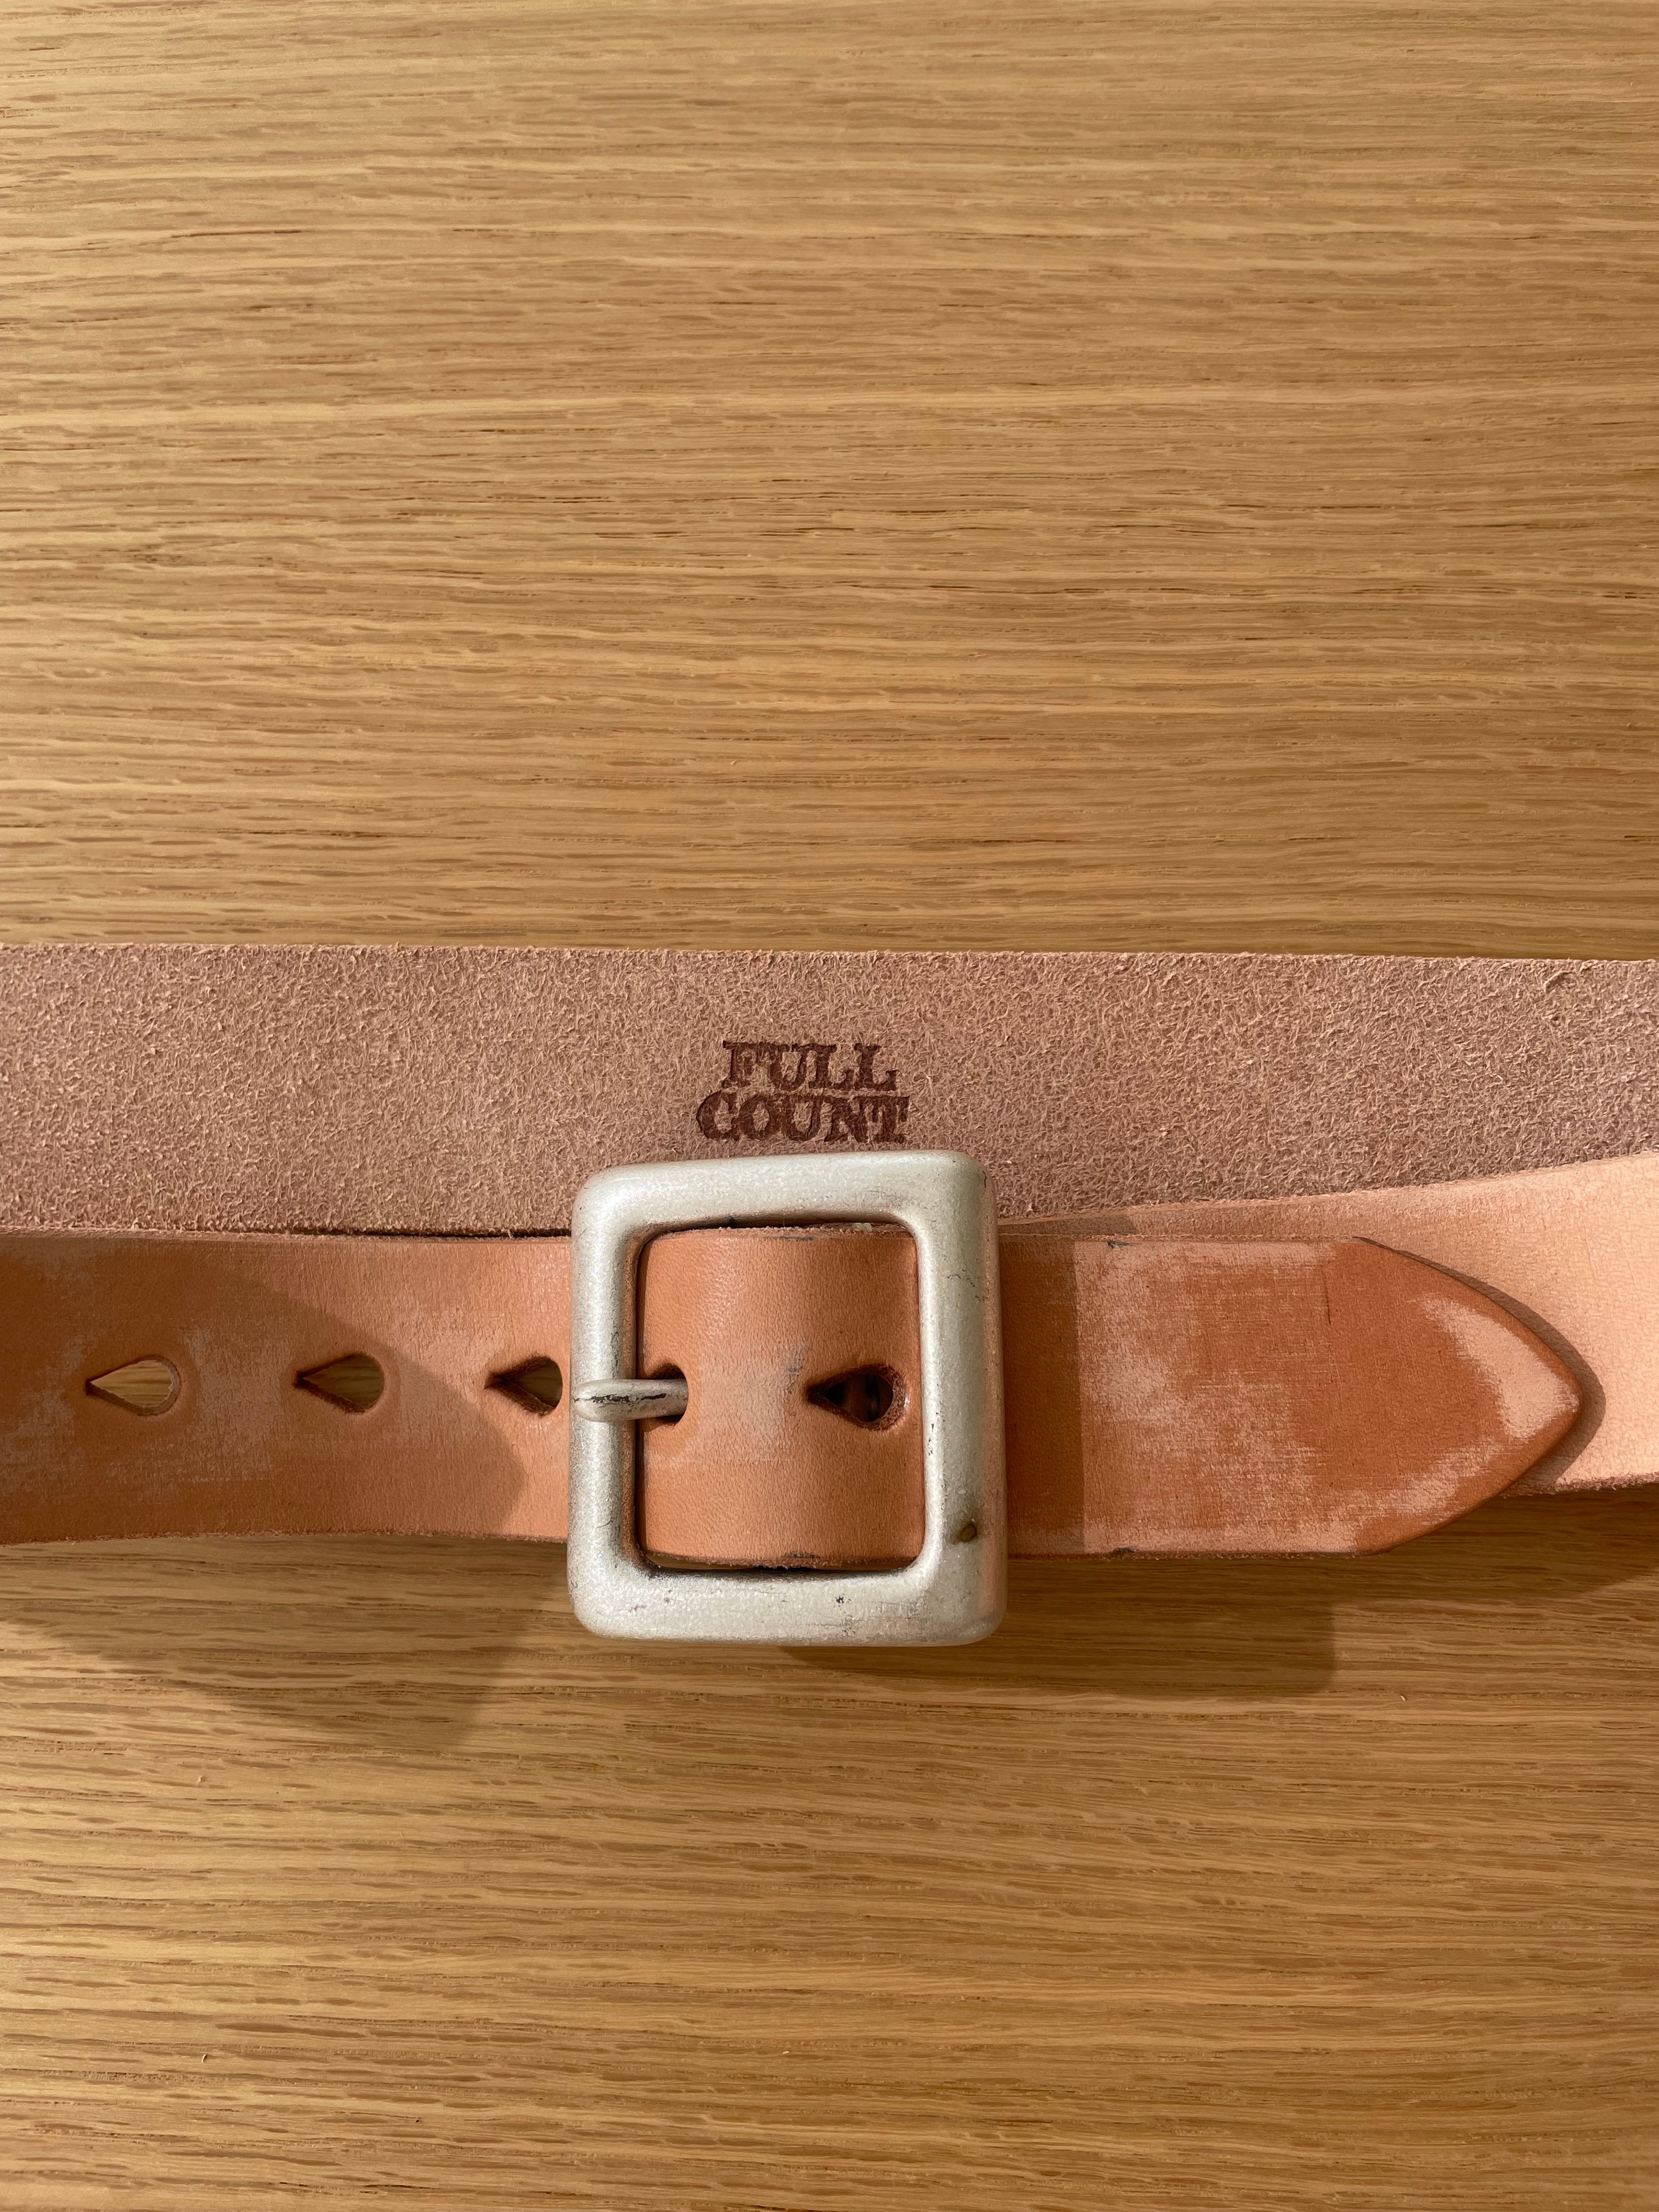 Wild Leather Garrison Belt in Vegetable Tanned Leather